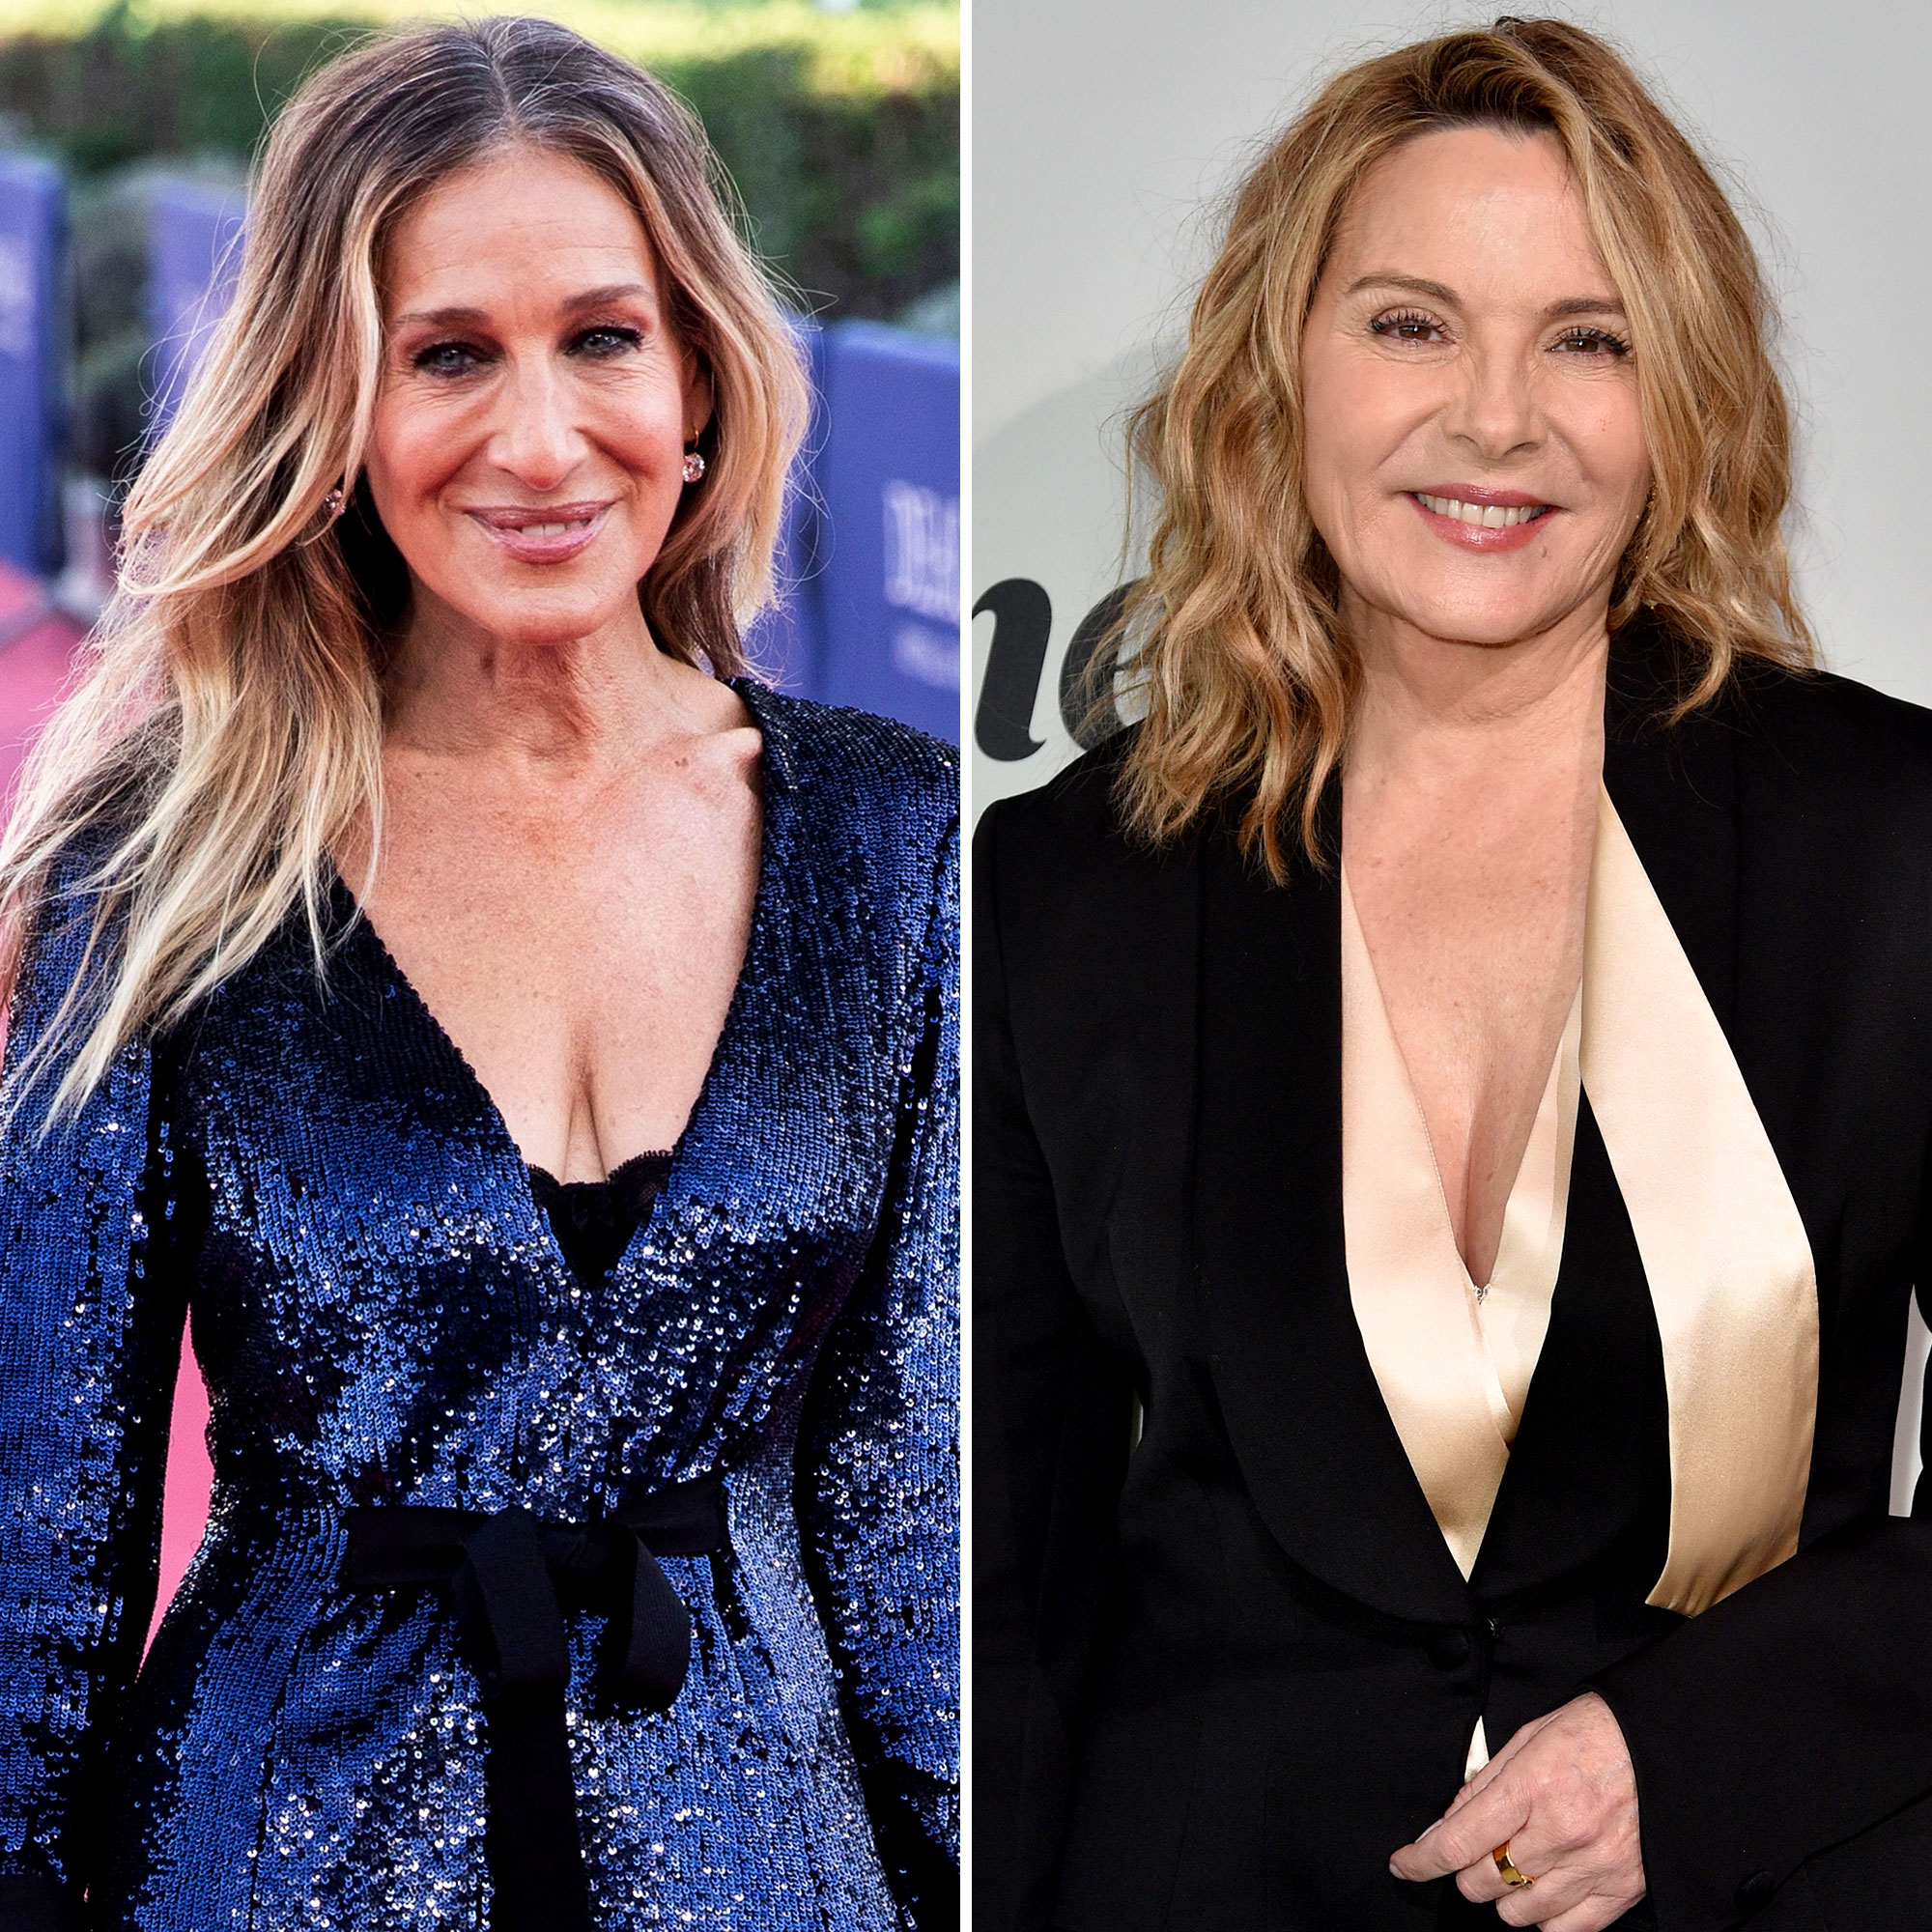 Sarah Jessica Parker Fucking - Sarah Jessica Parker Gets Real About 'Very Painful' Kim Cattrall Drama